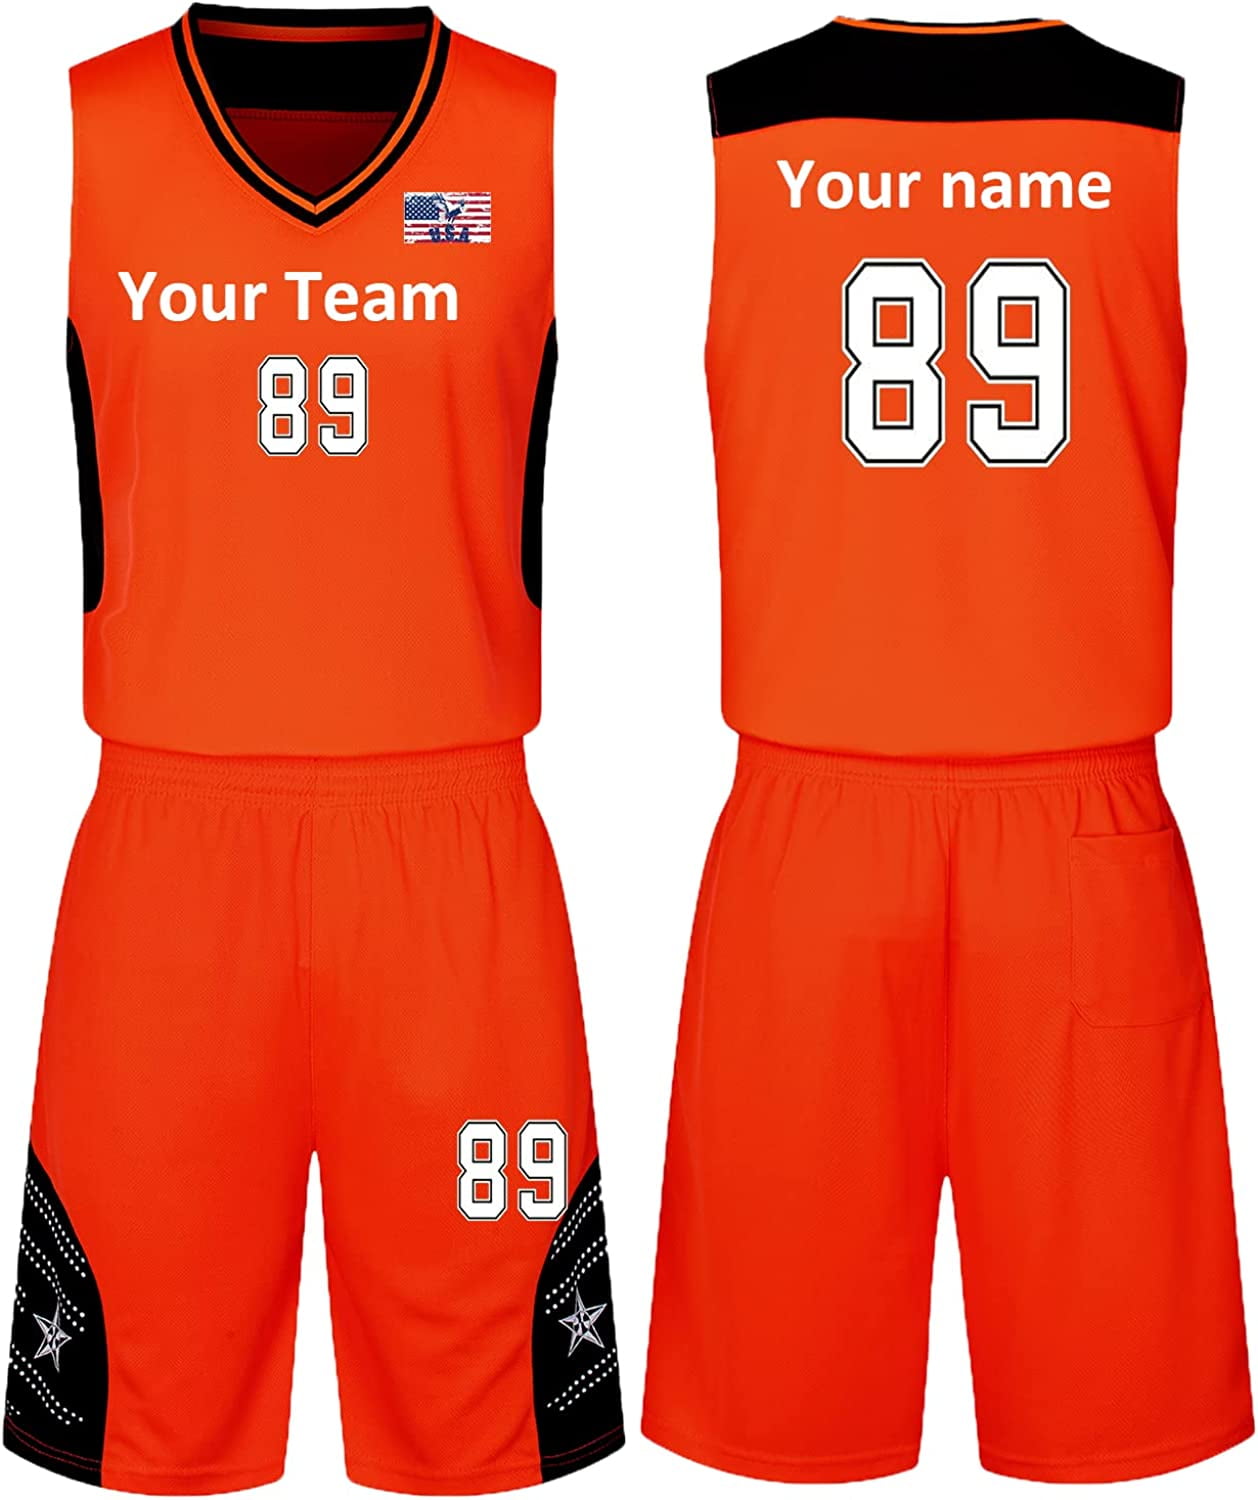 basketball jerseys with your name on it